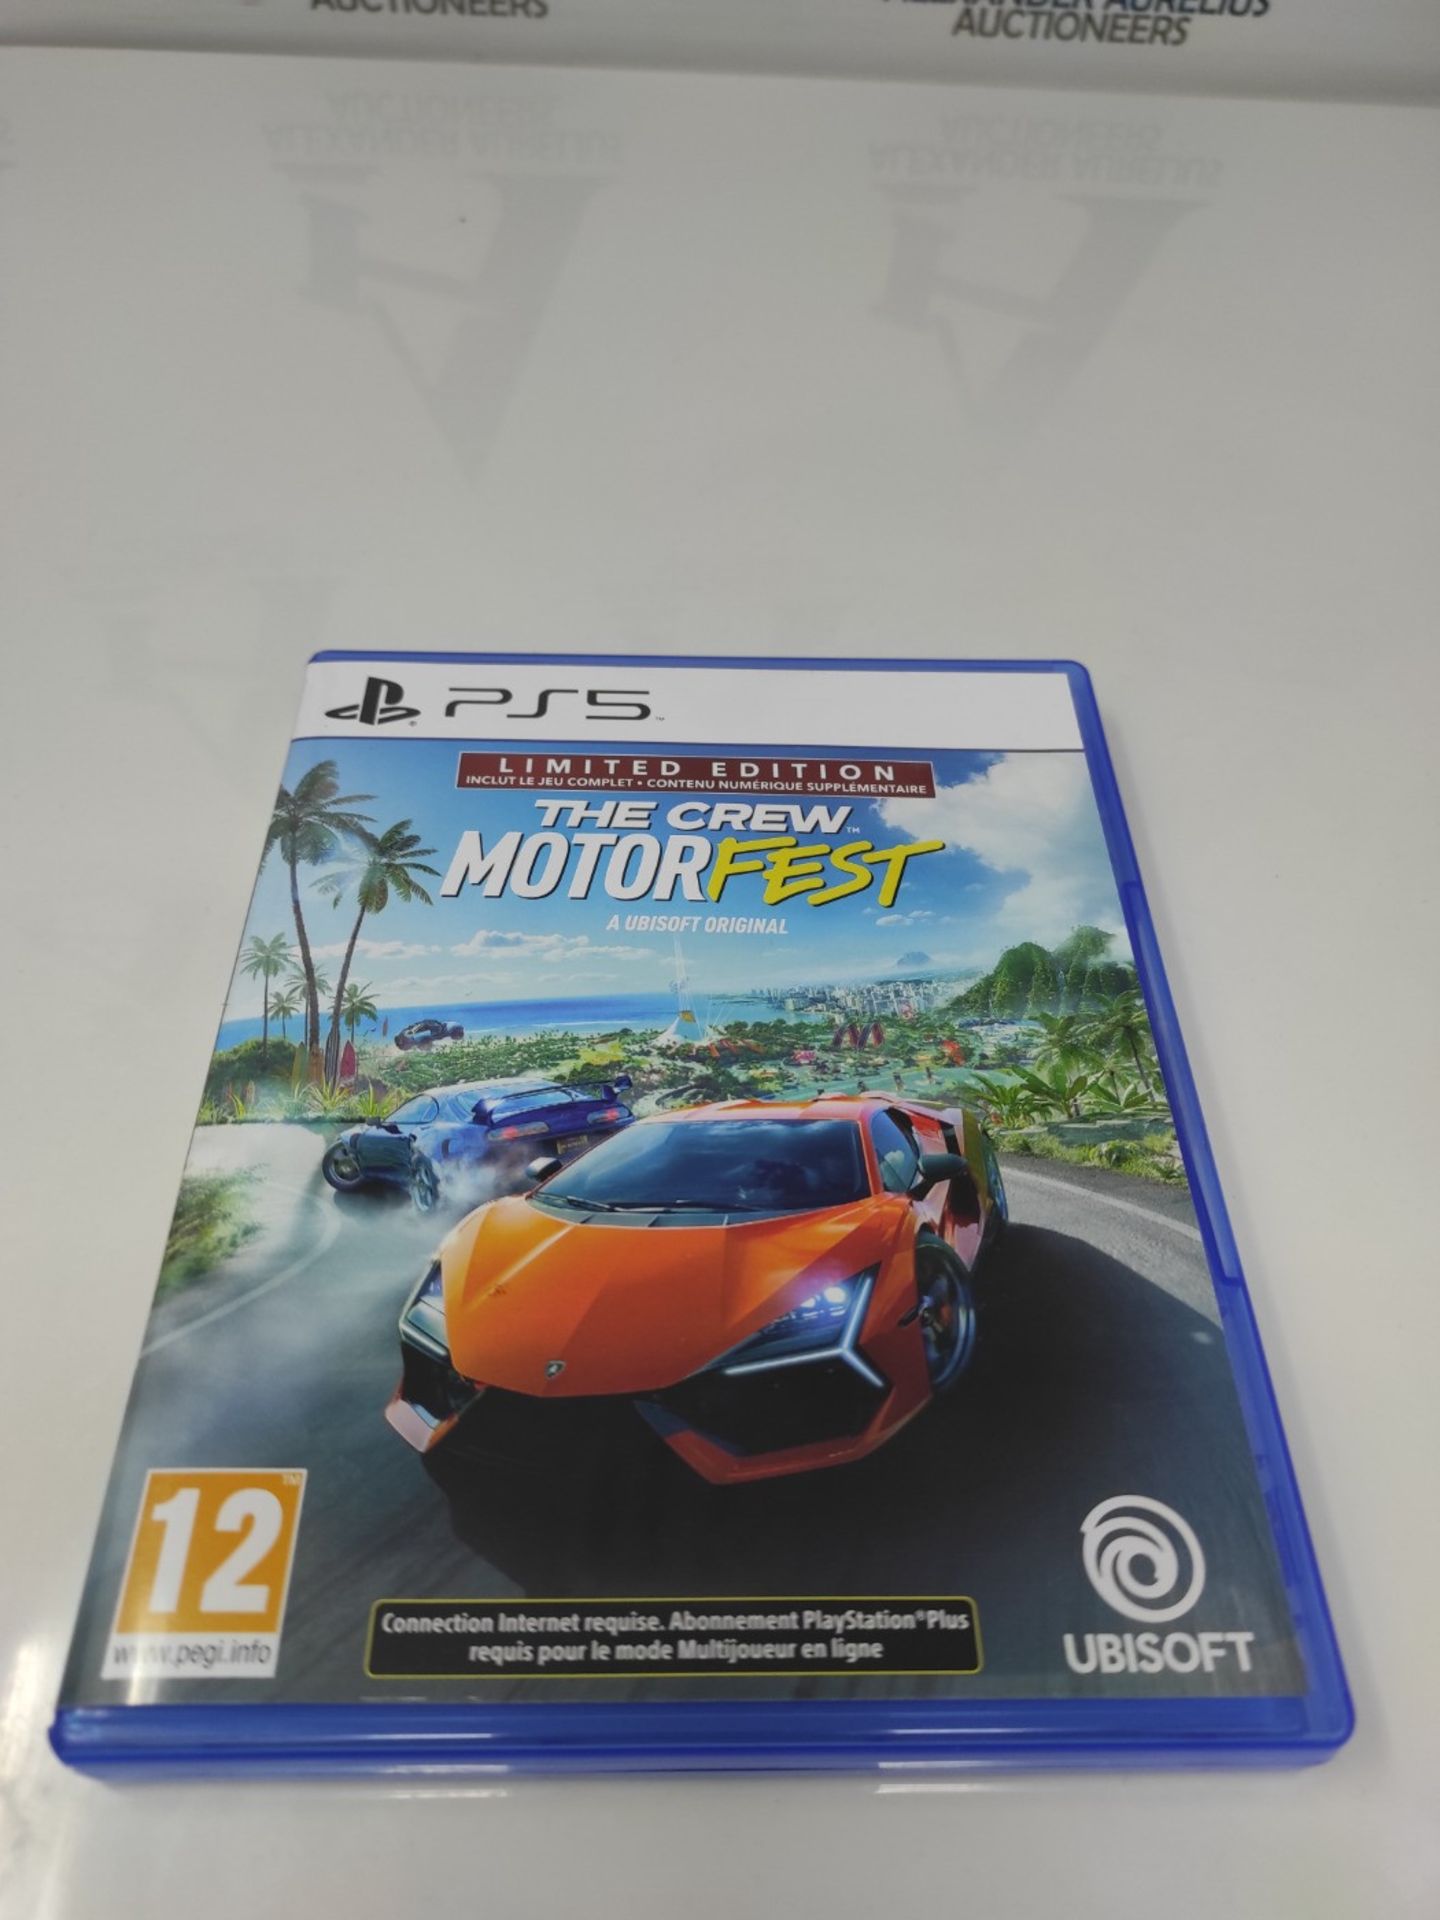 The Crew Motorfest Limited Edition for PS5 - Image 2 of 6